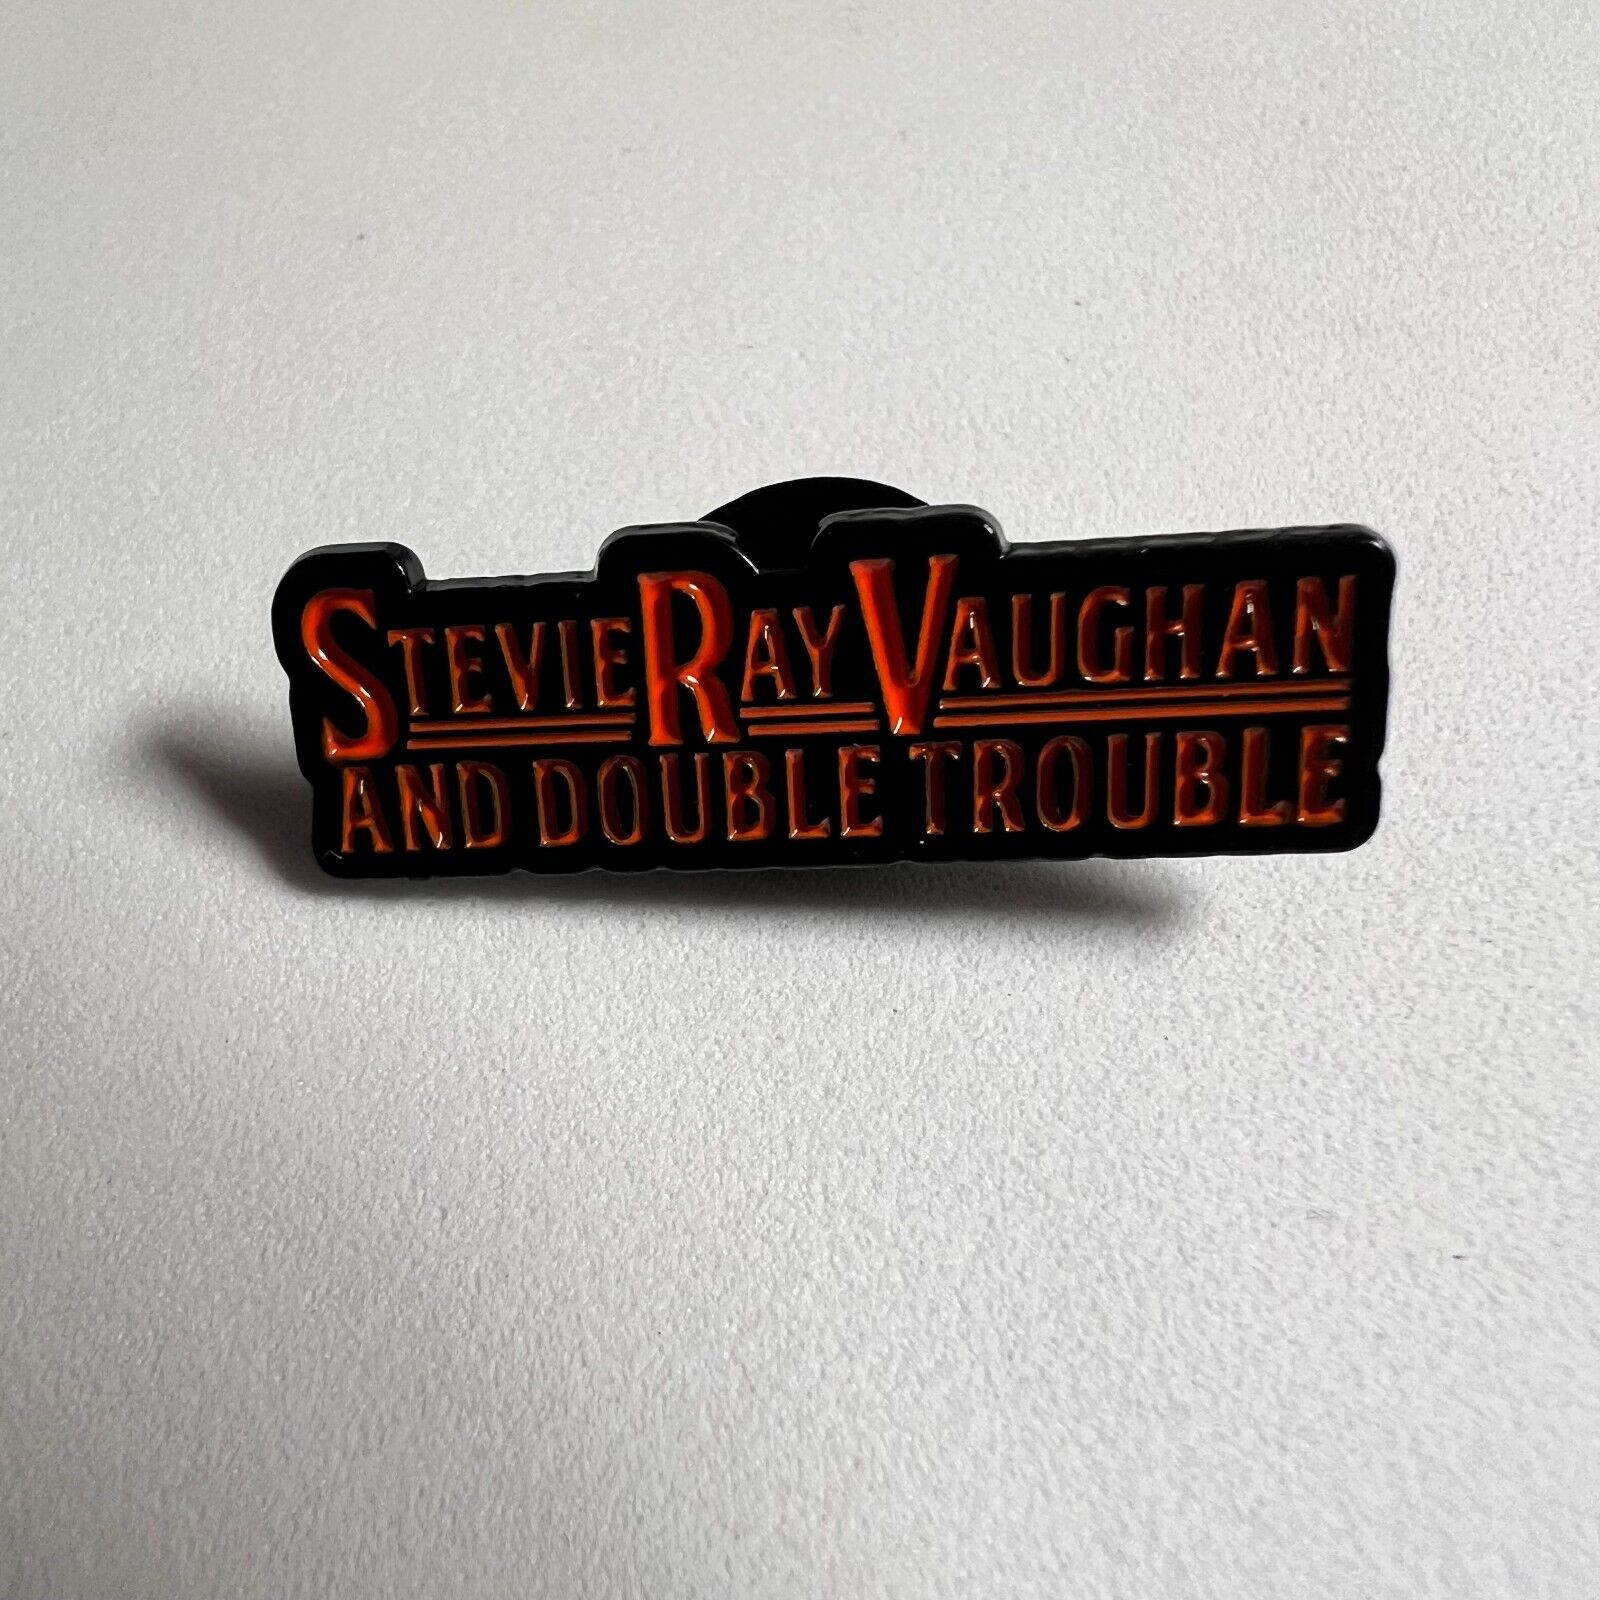 “Stevie Ray Vaughan And Double Trouble” Enamel Pin Badge NEW GIFT Band Music